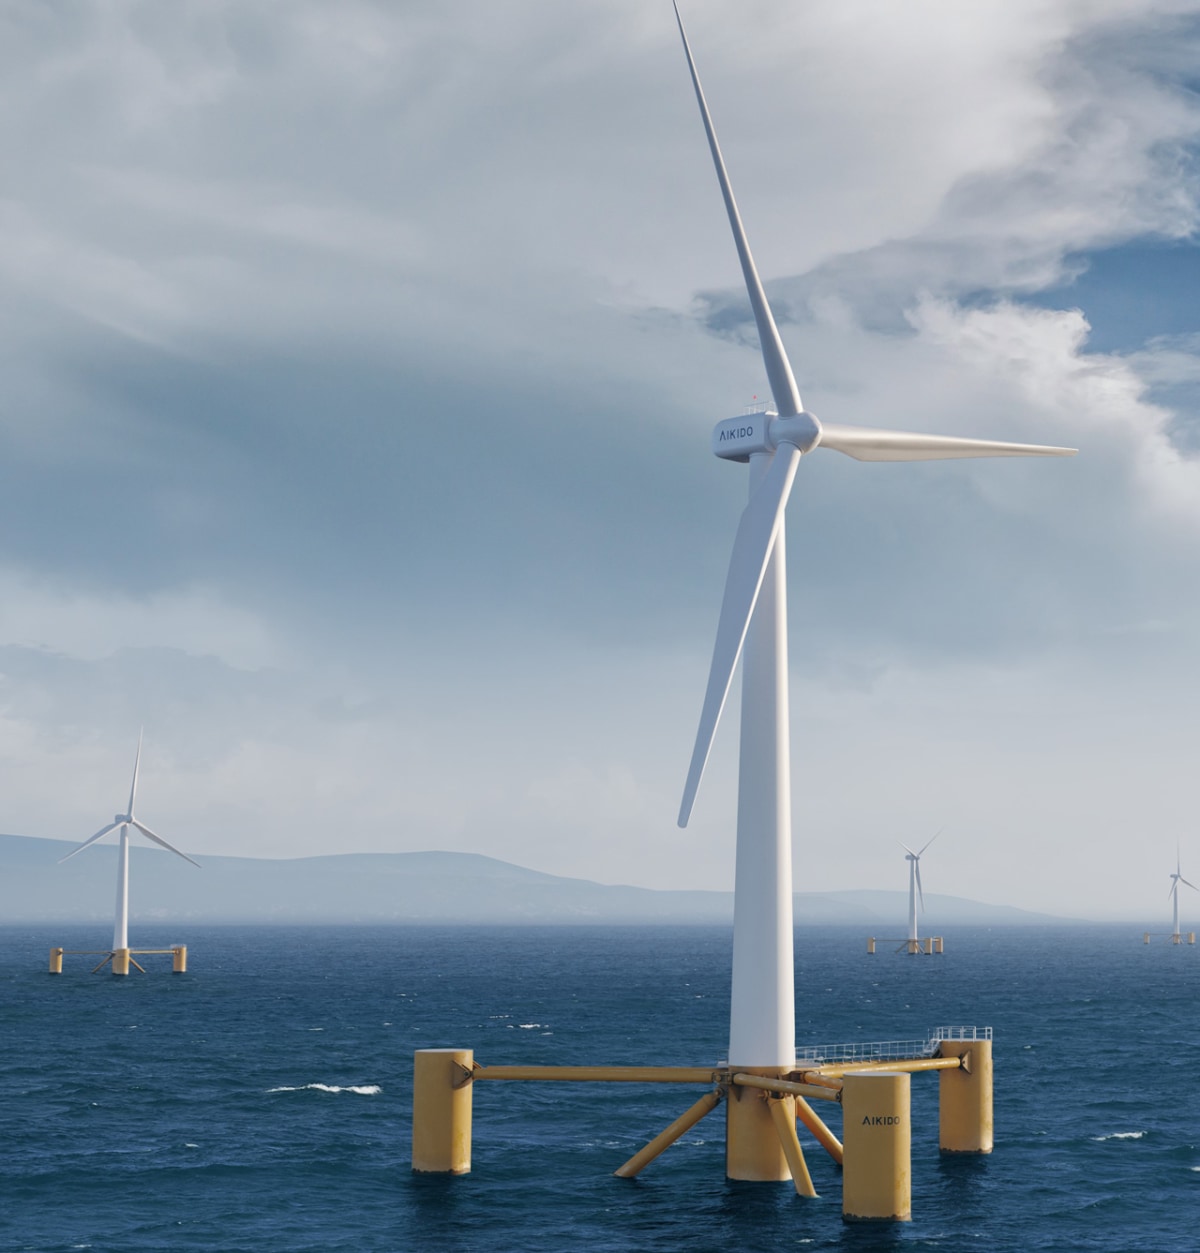 This floating wind turbine is designed to pop up in the open ocean